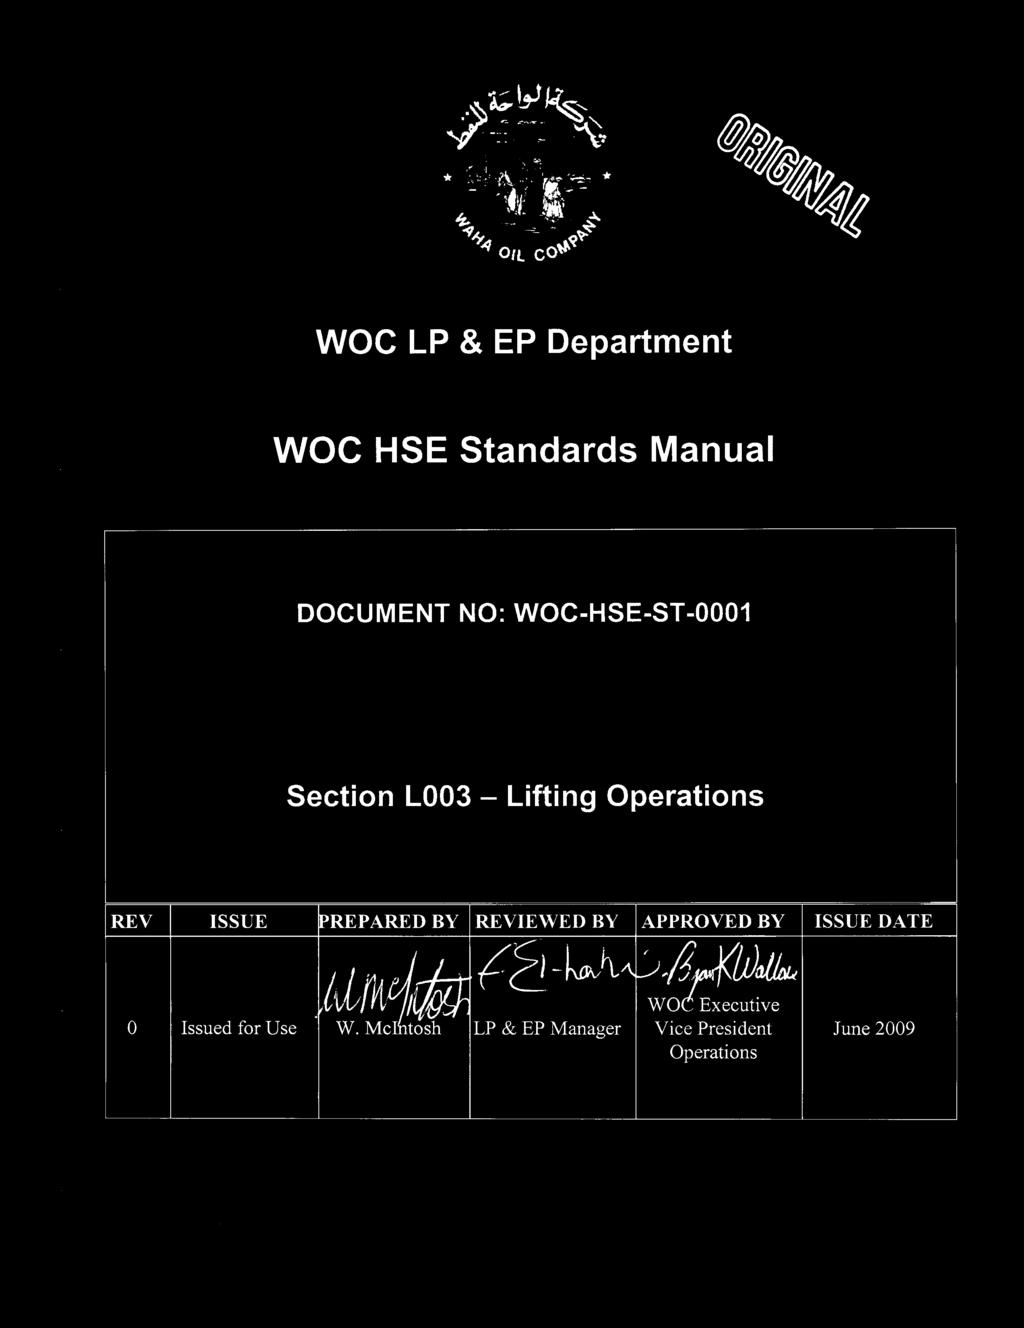 WOC-HSE-ST-0001 Section L003 - Lifting Operations REV ISSUE PREPARED BY REVIEWED